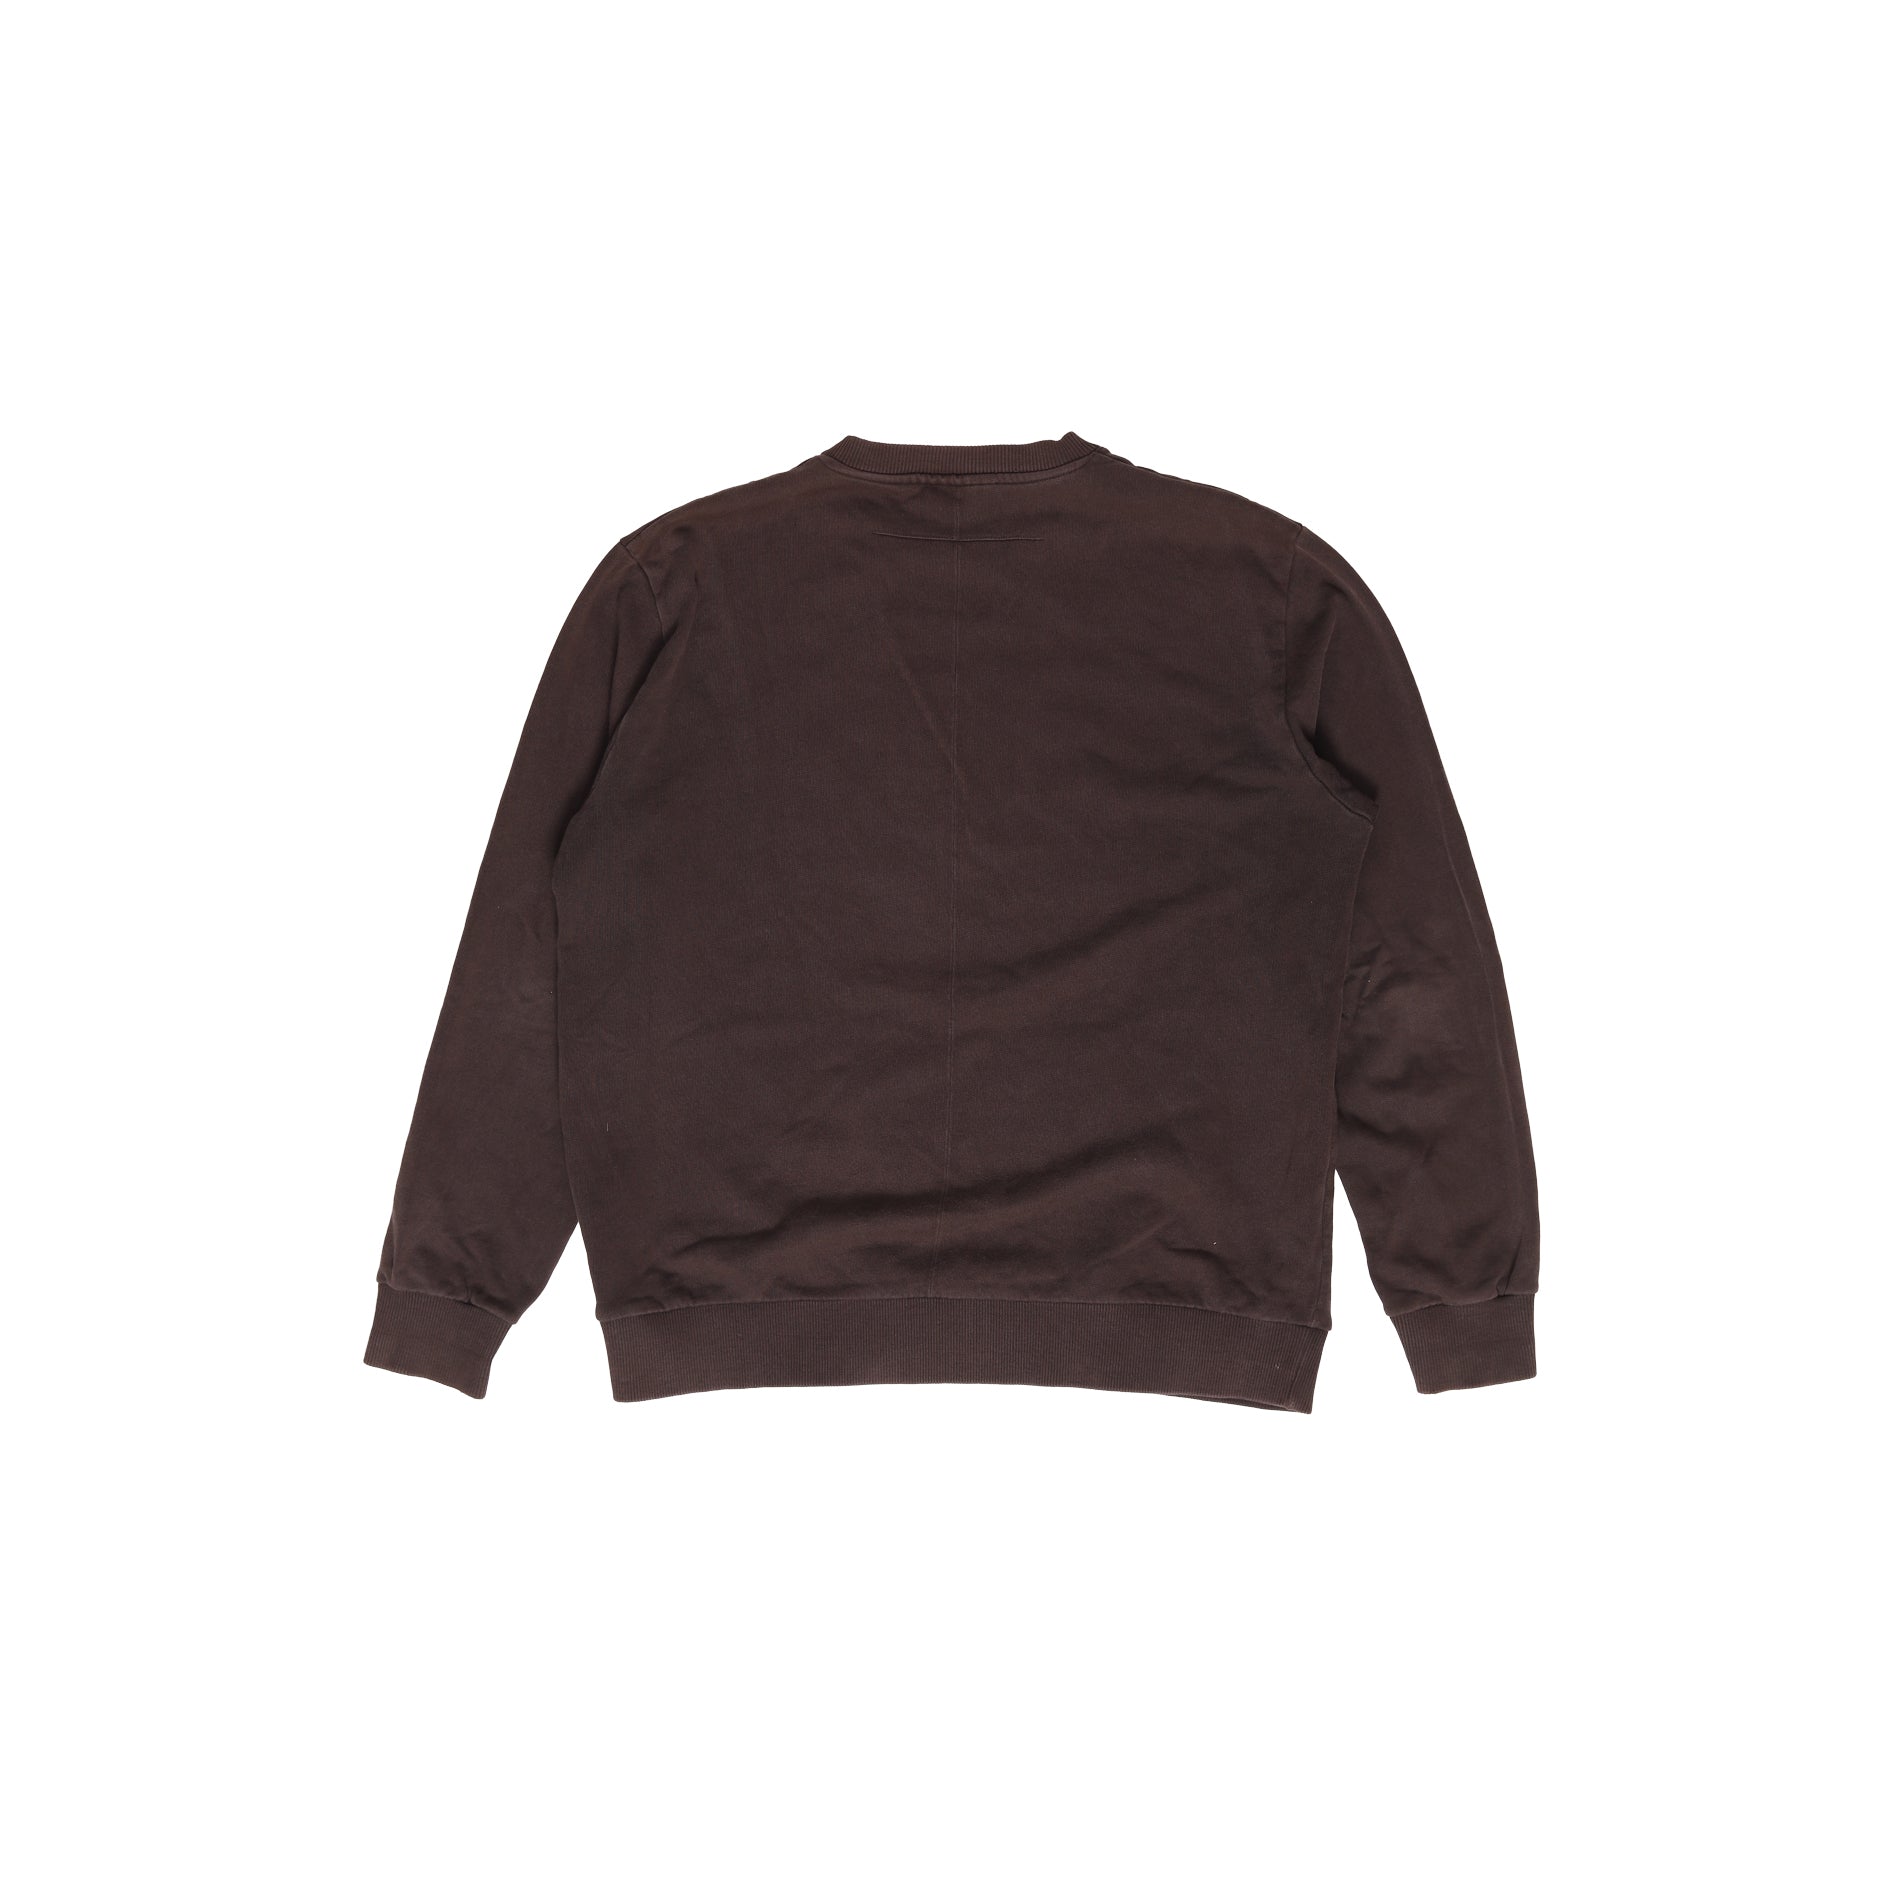 Givenchy FW11 Brown Oversized Rottweiler Sweatshirt